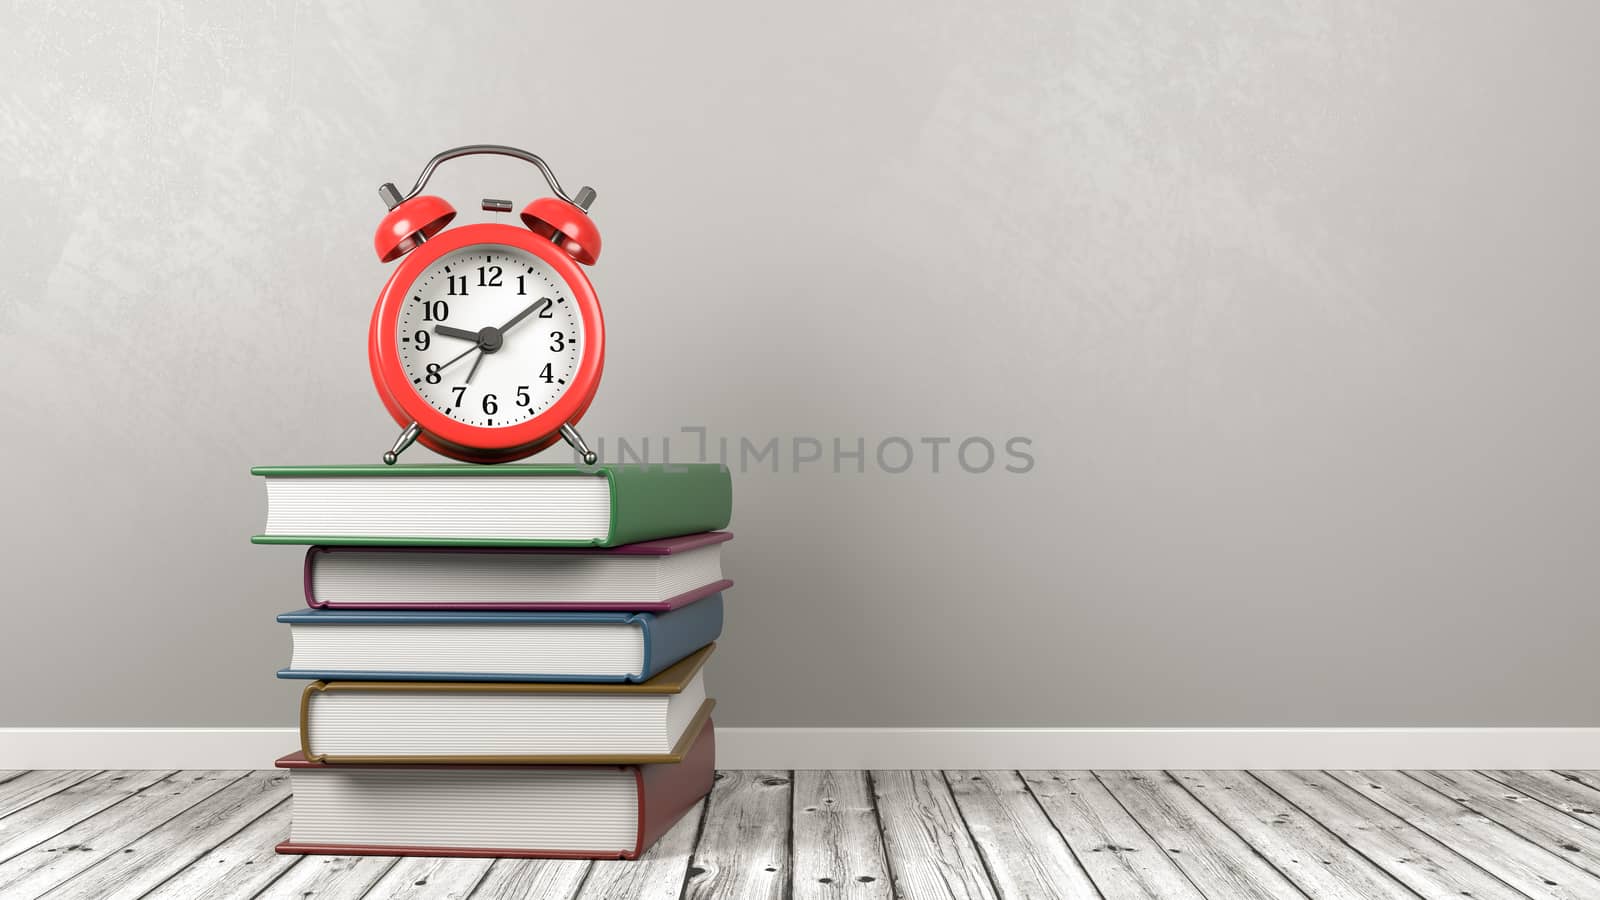 Stack of Books with Alarm Clock on Wooden Floor Against Gray Wall with Copy Space 3D Illustration